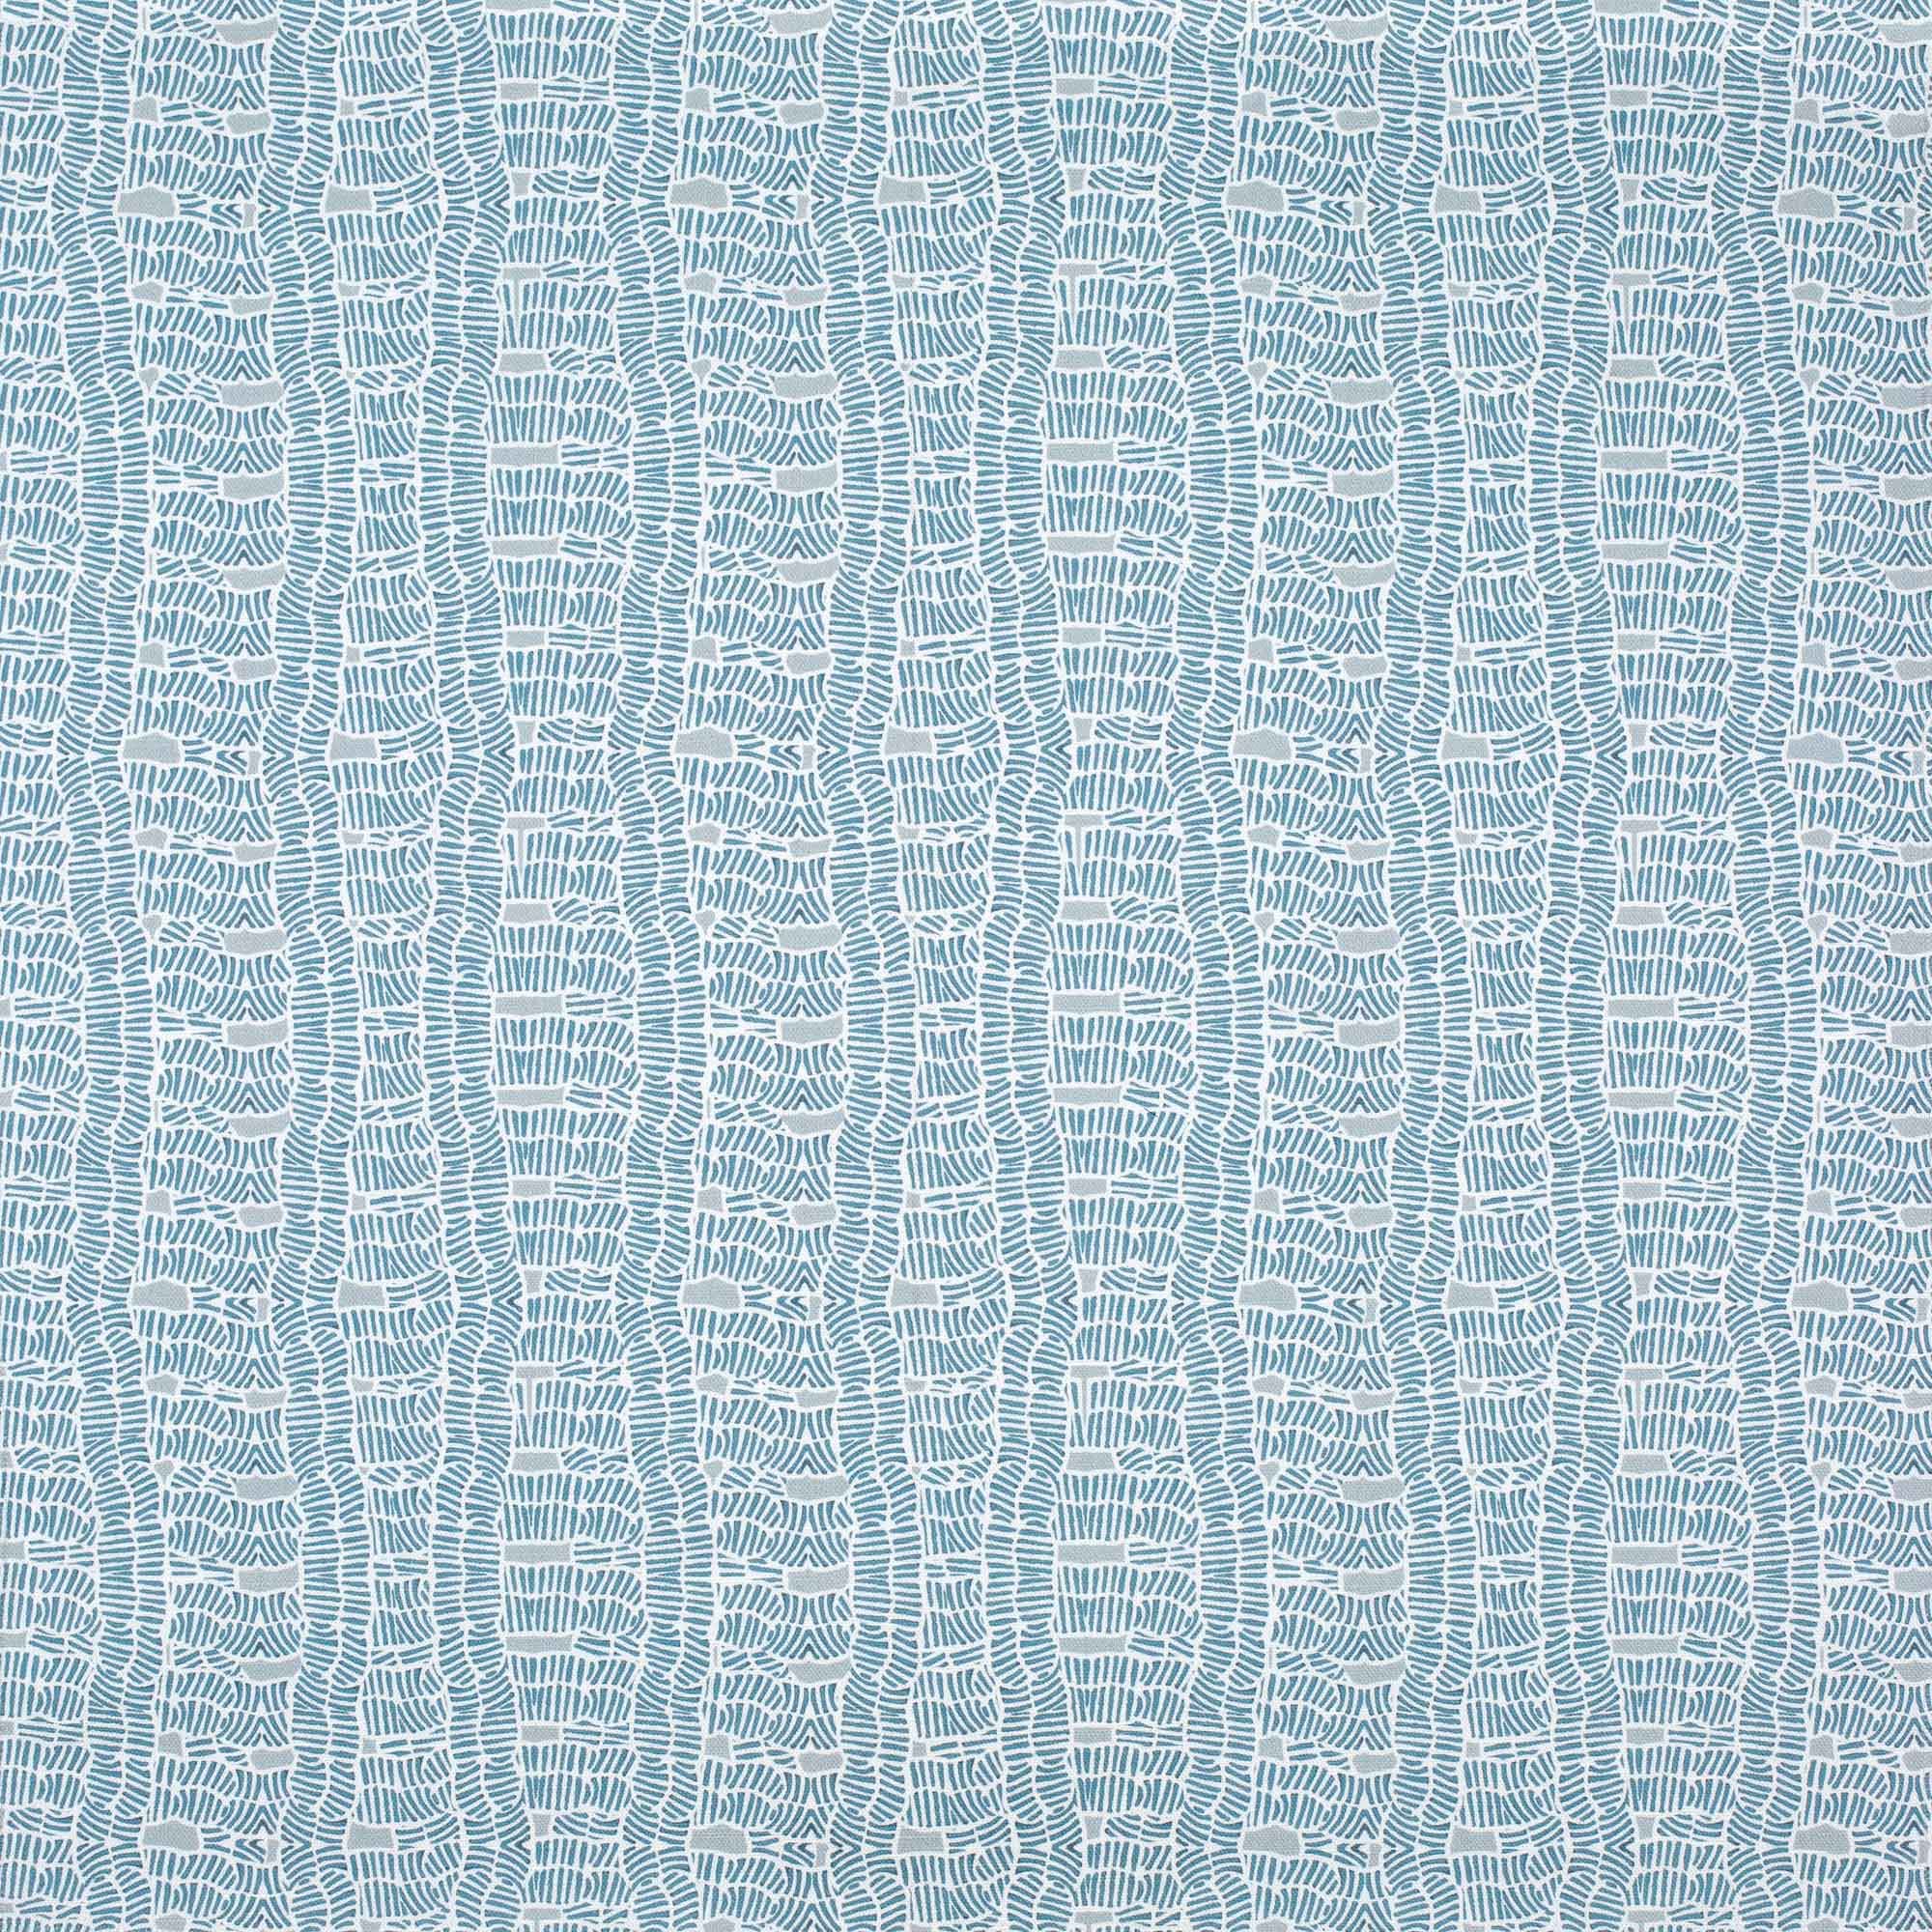 Detail of fabric in a playful curvy grid print in blue and gray on a white field.